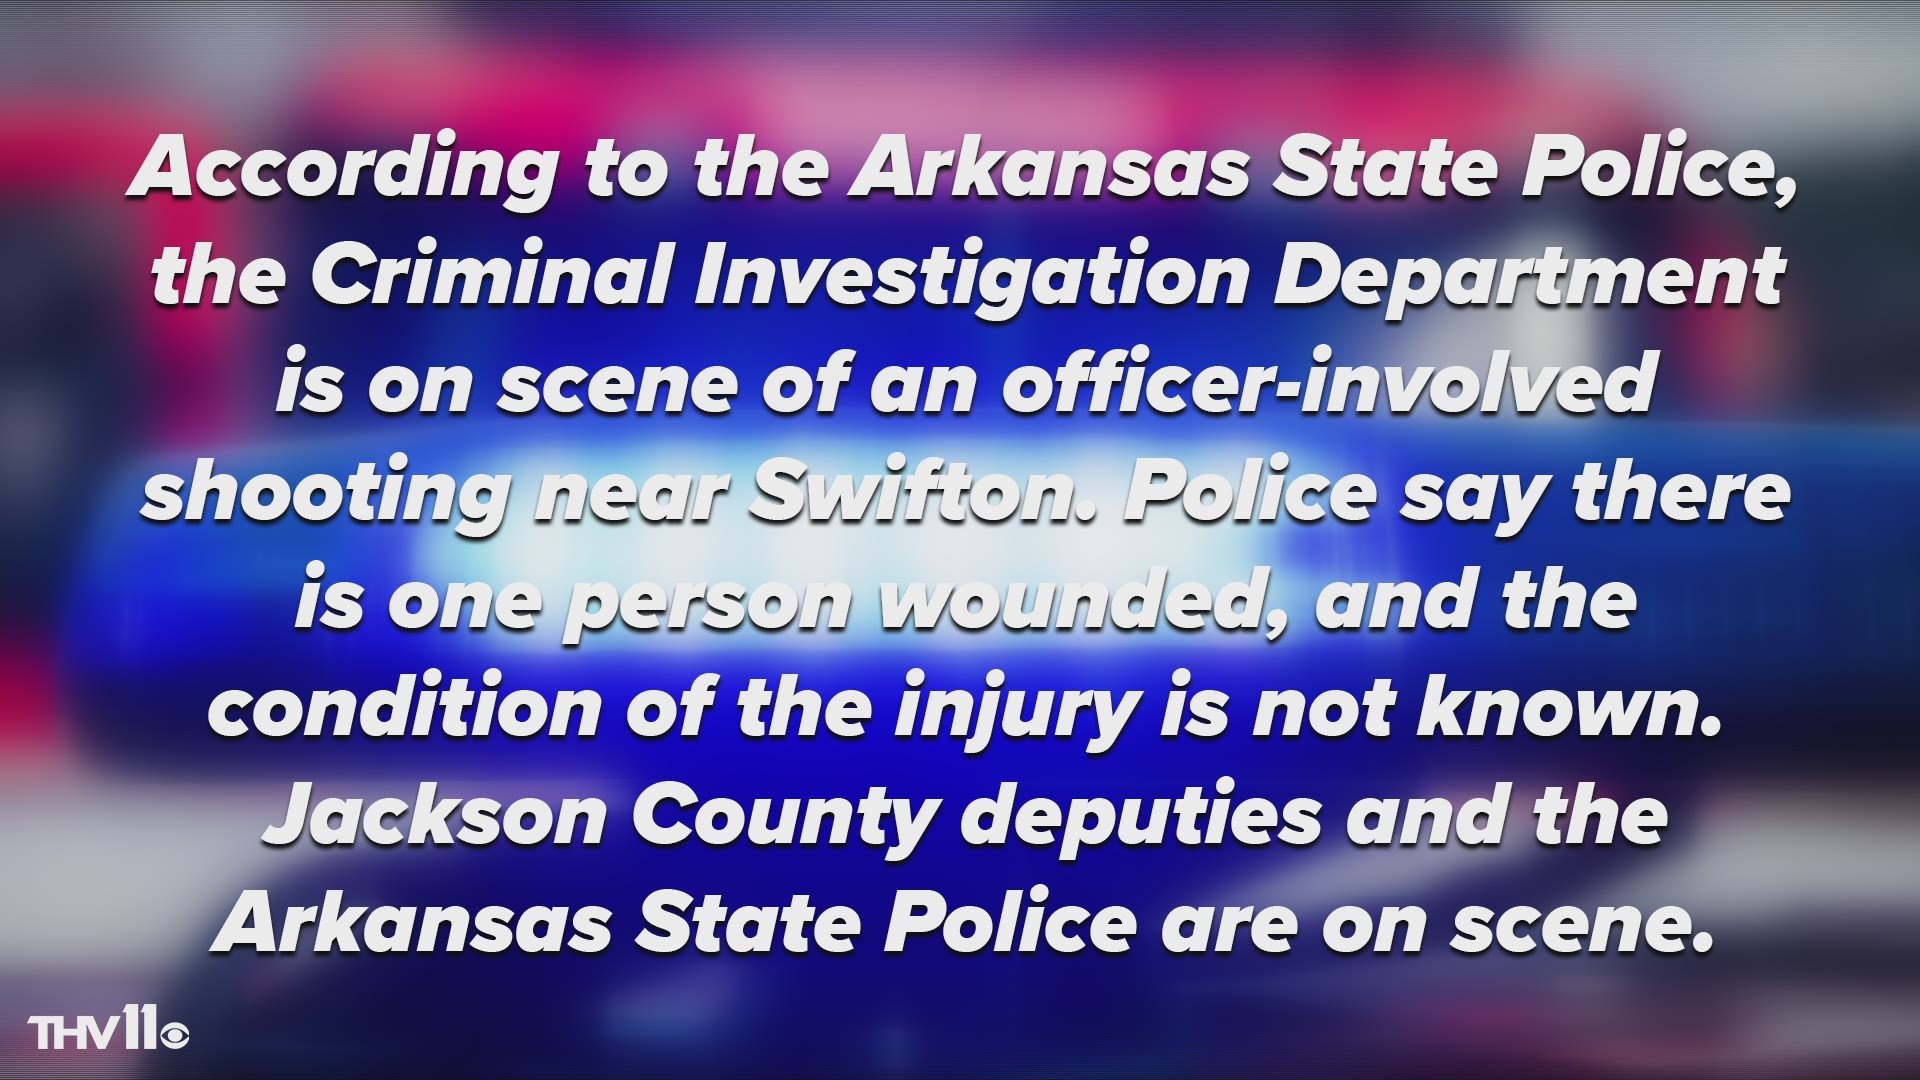 Arkansas State Police confirm 1 injured in officer-involved shooting near Swifton